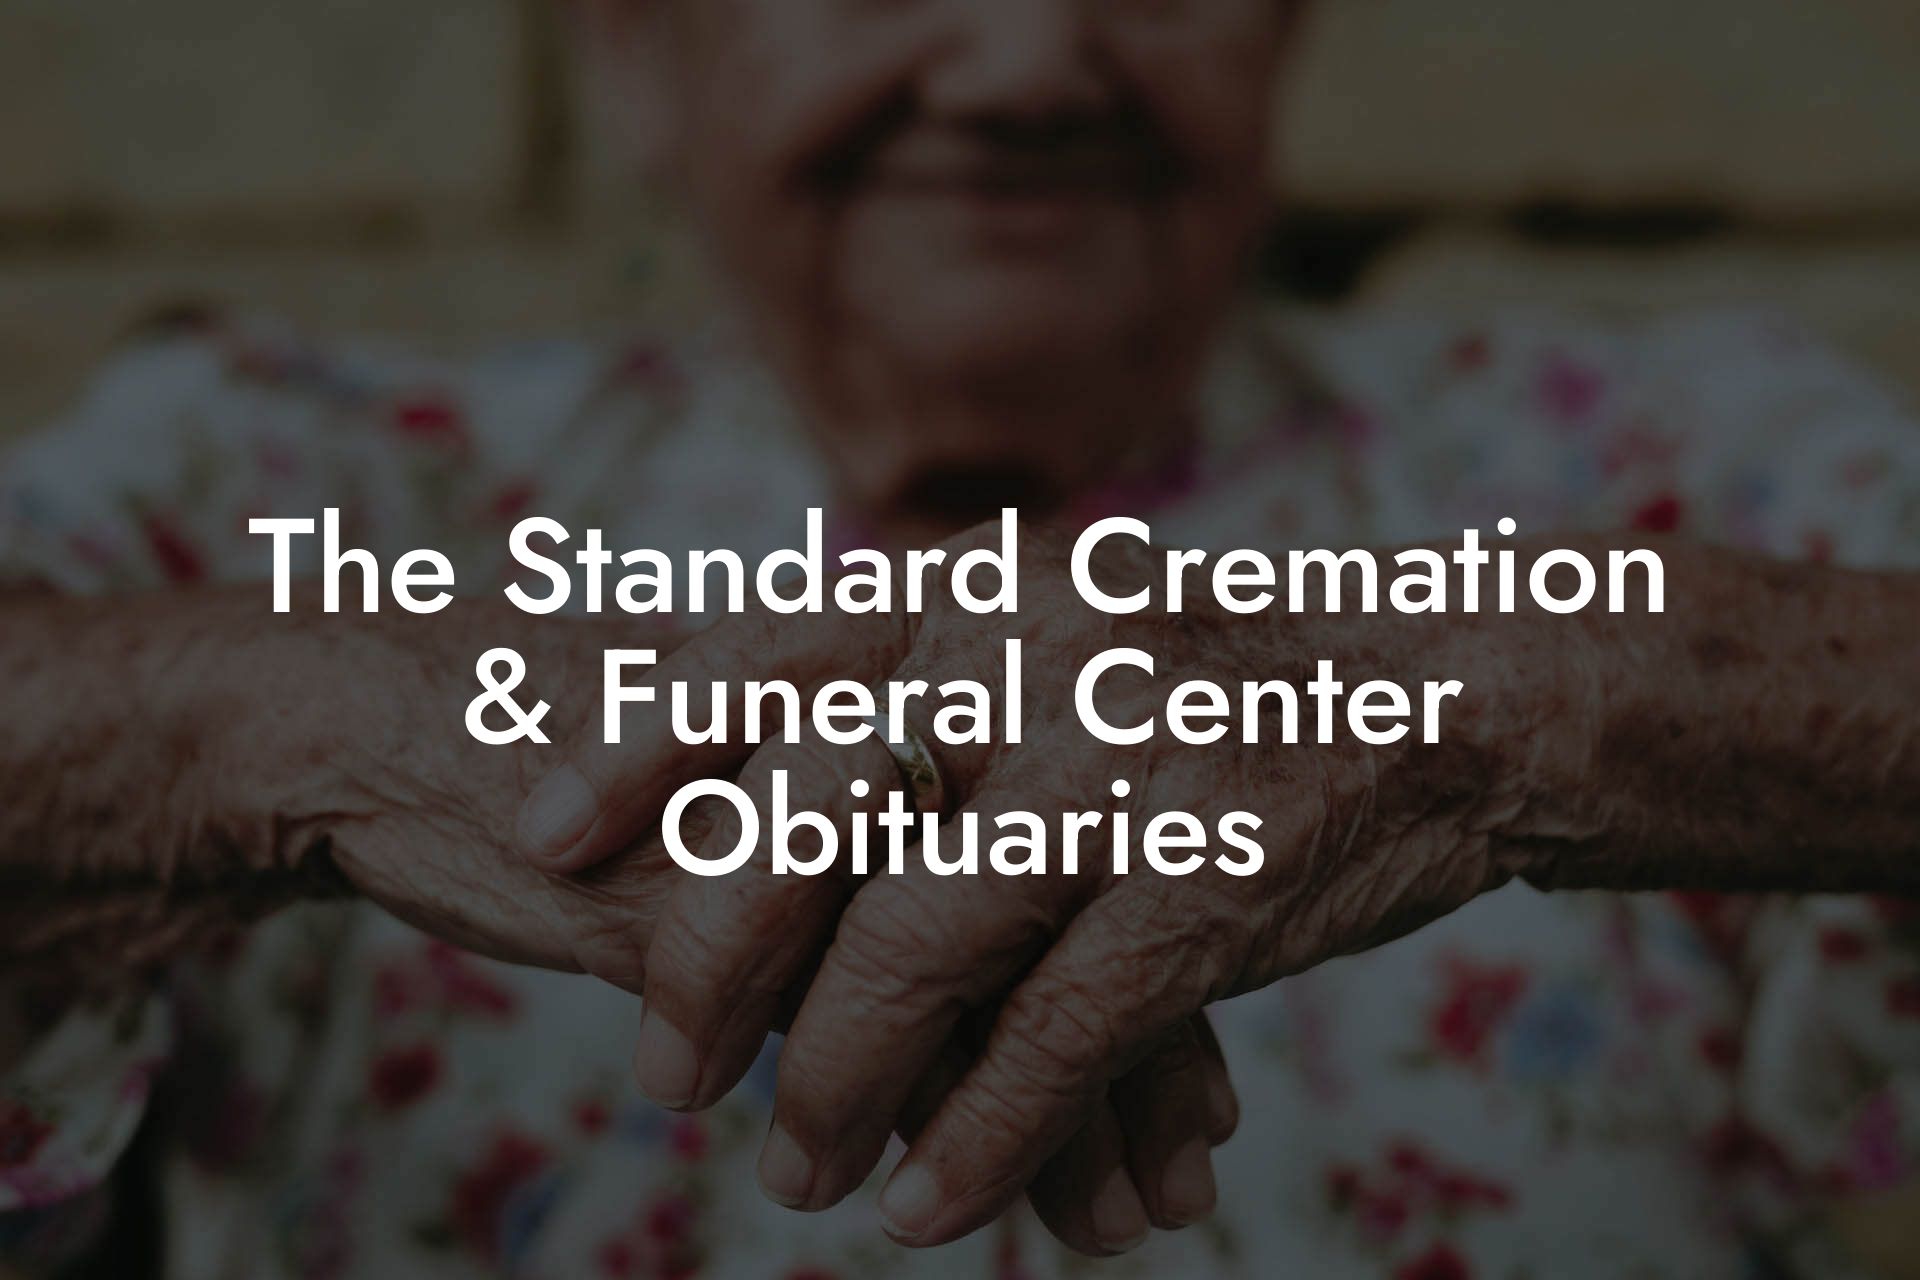 The Standard Cremation & Funeral Center Obituaries